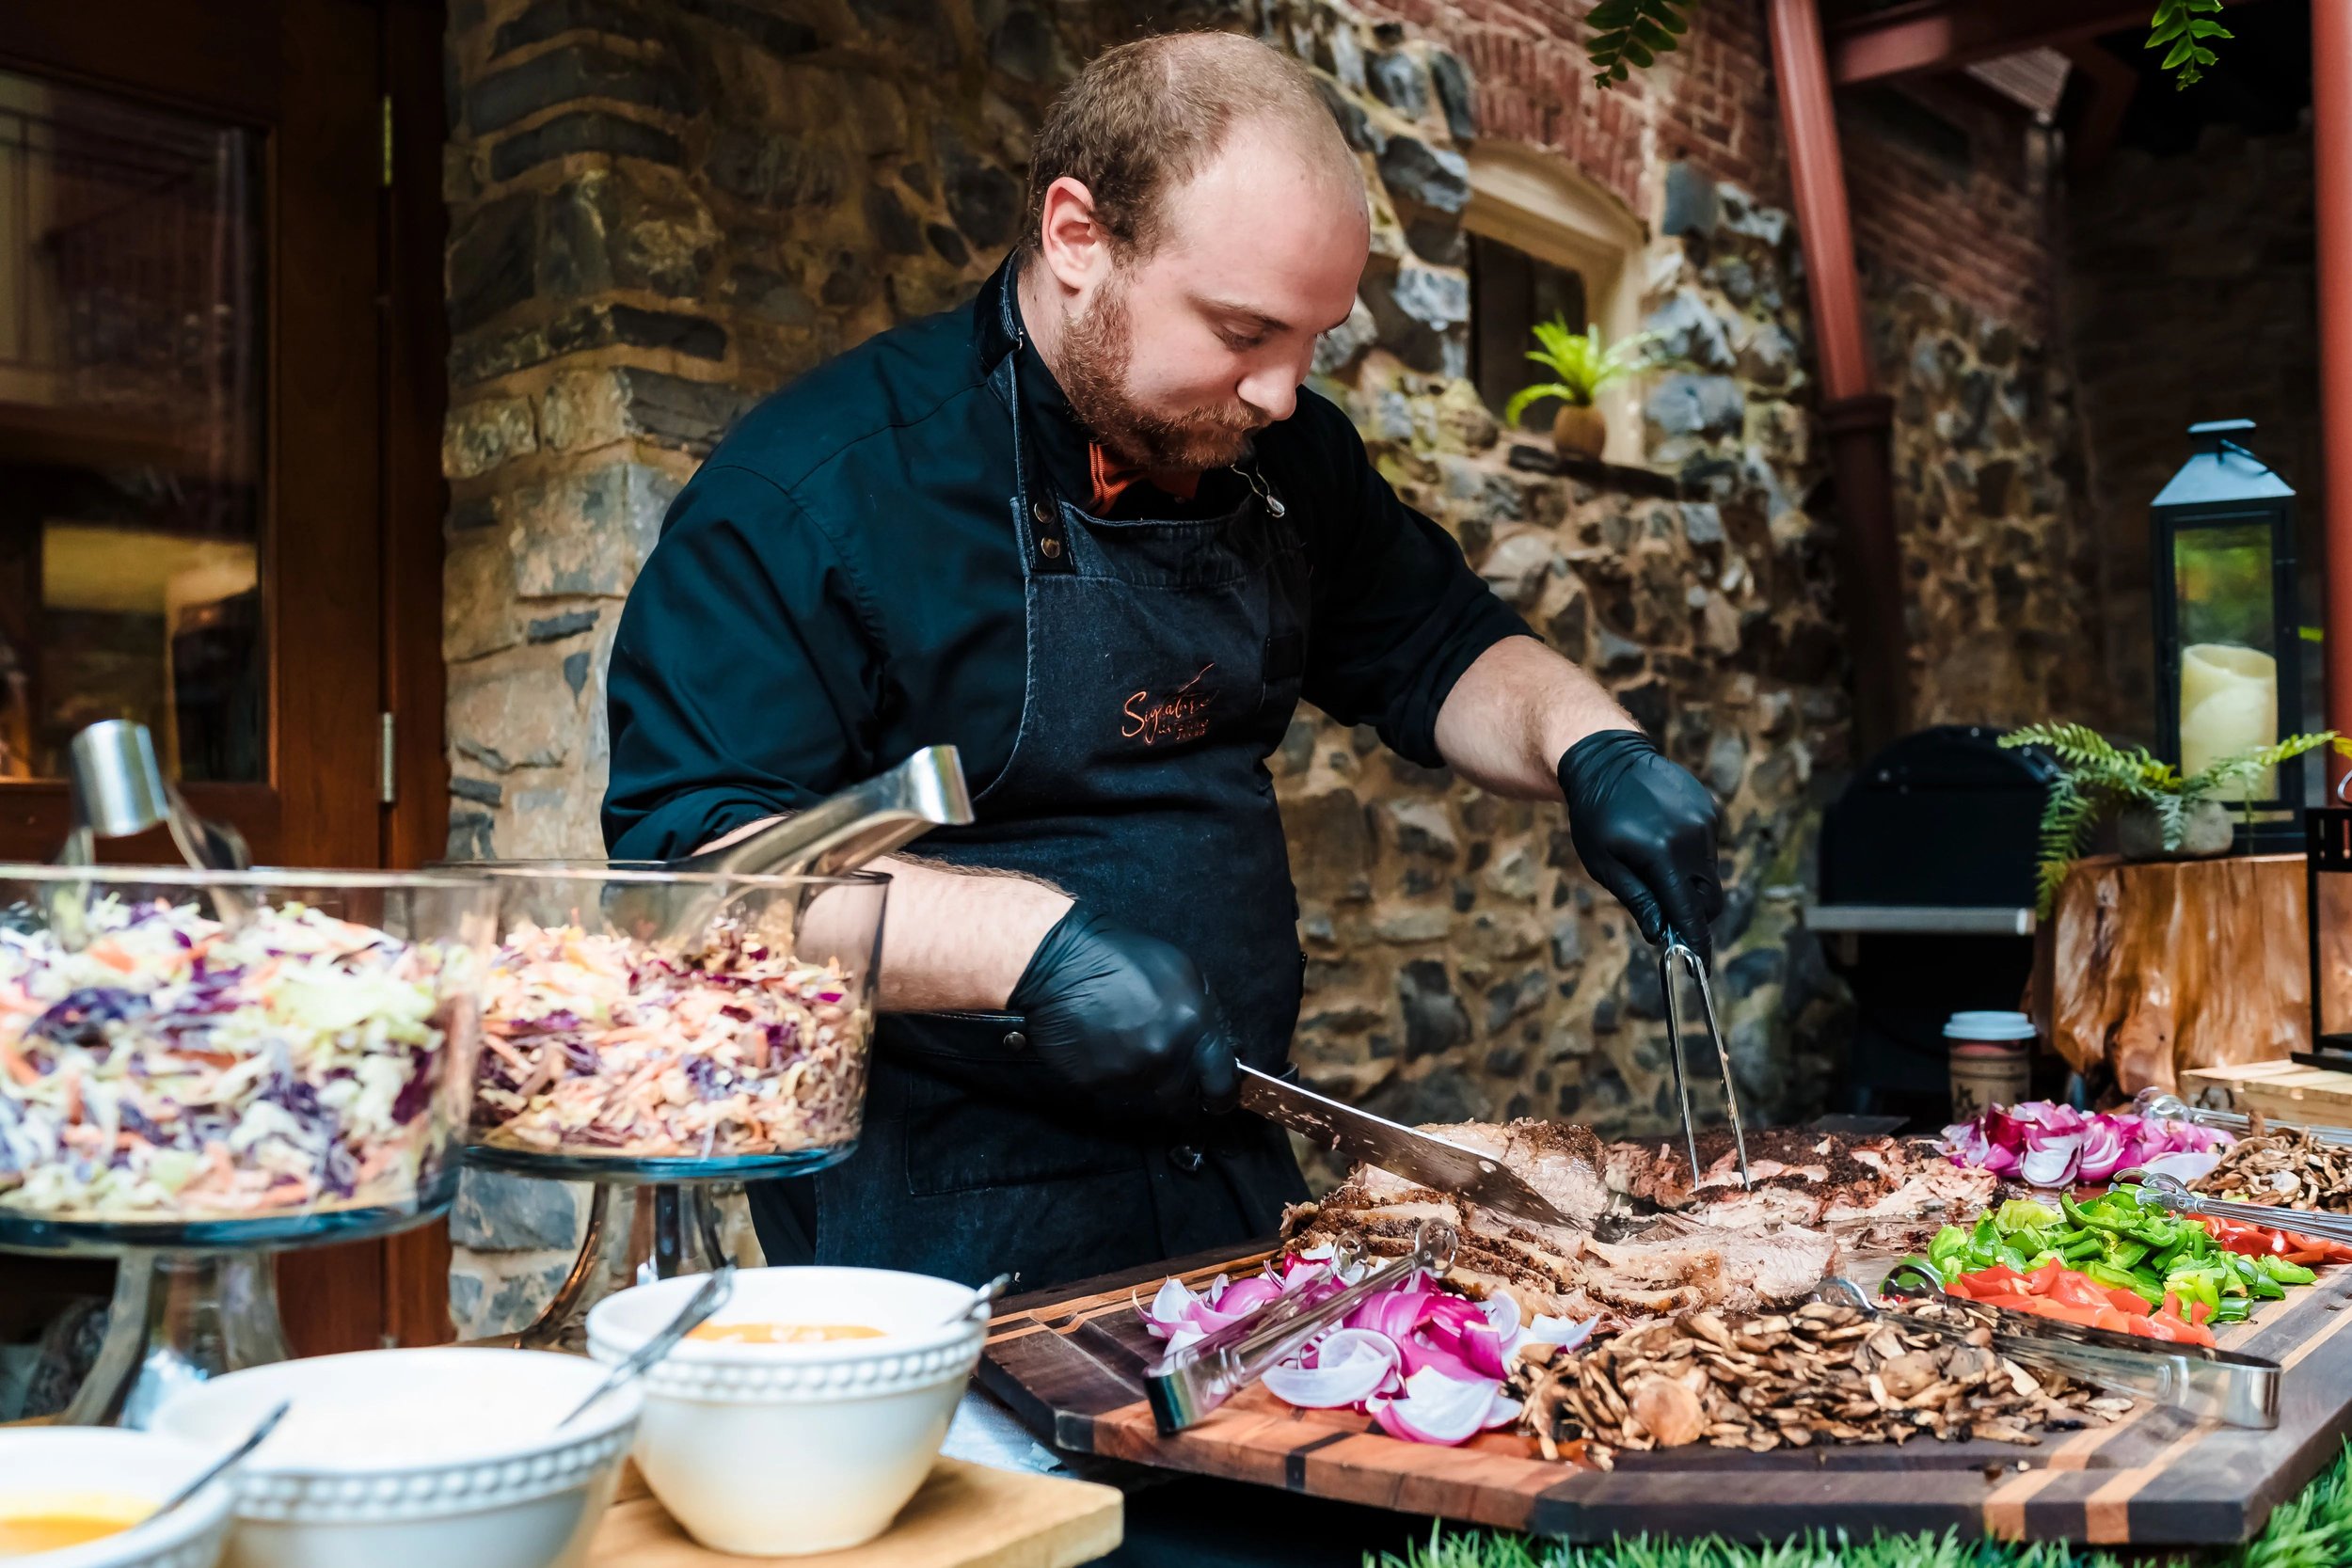 Man carving meat at outdoor food station